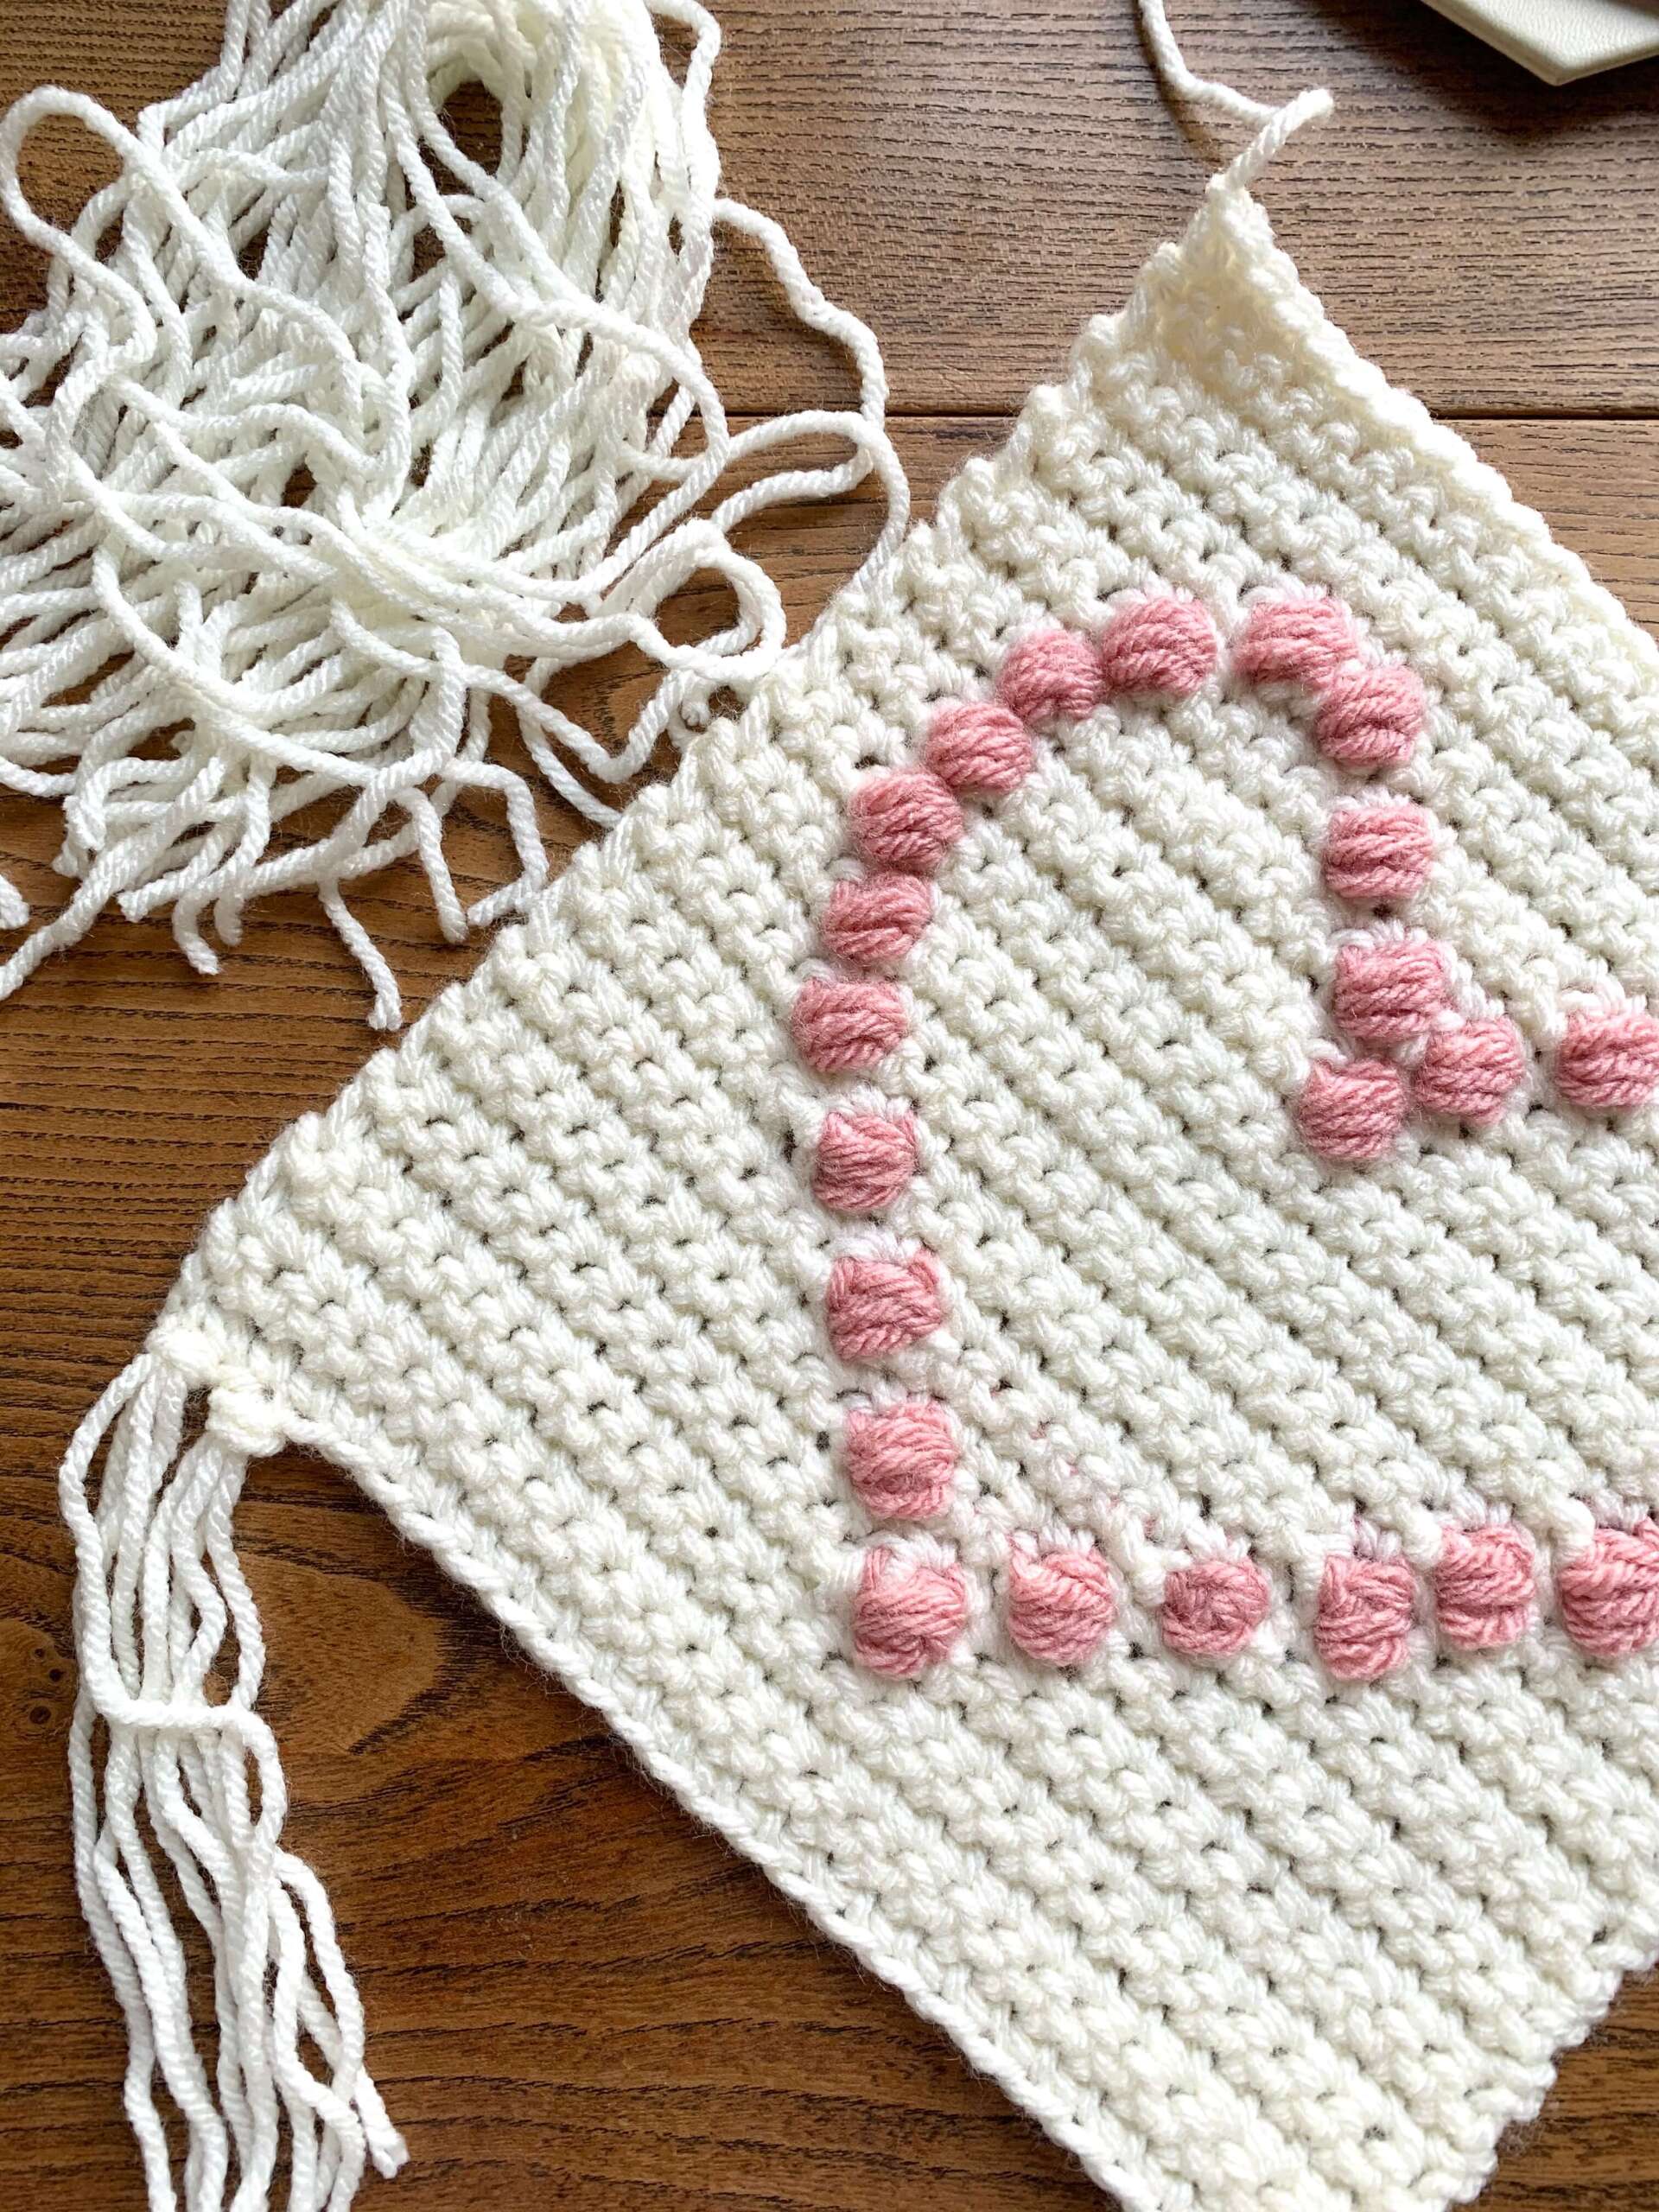 How to Crochet a Valentines Heart